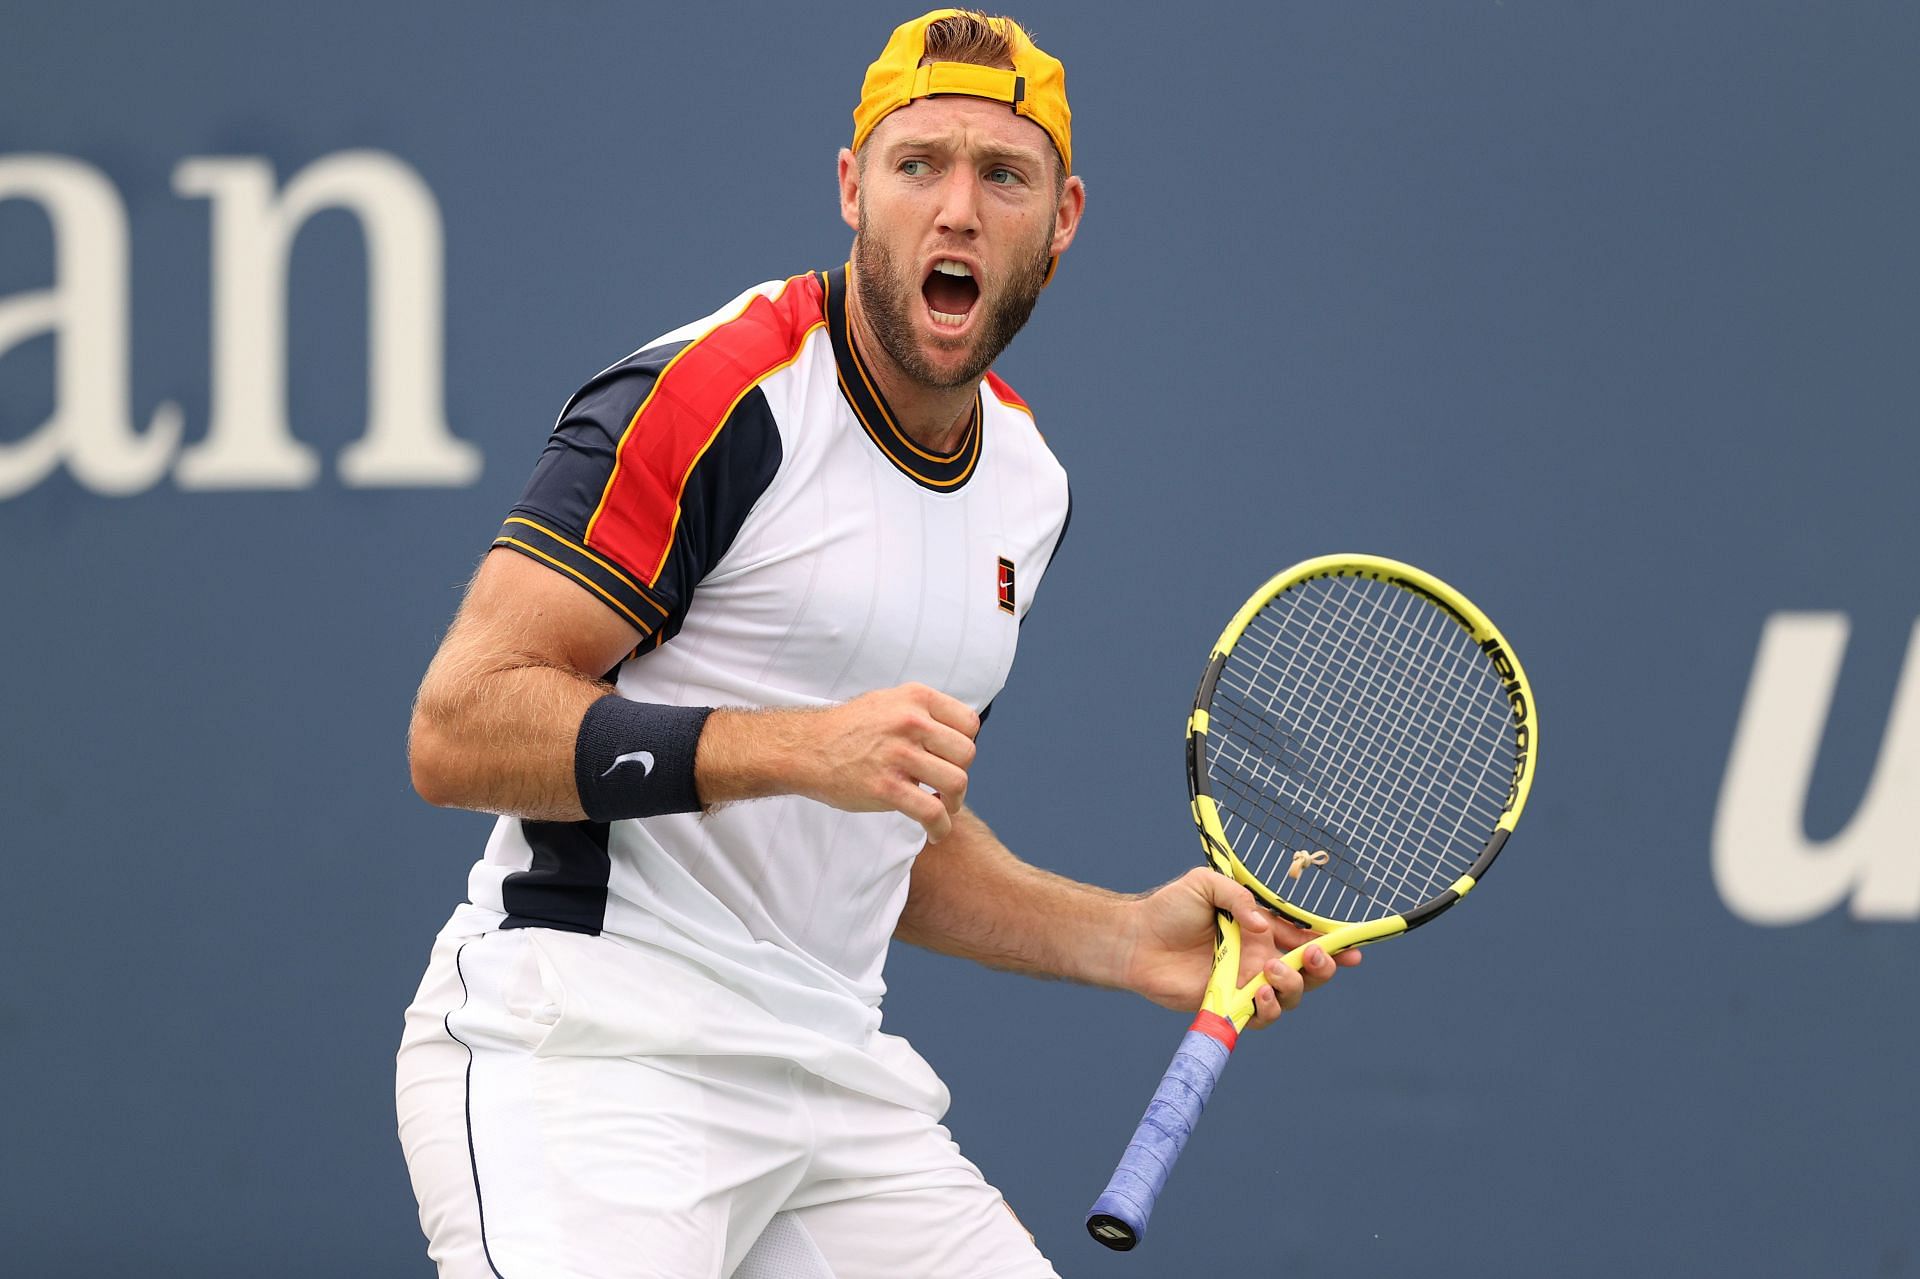 Jack Sock at the 2021 US Open.